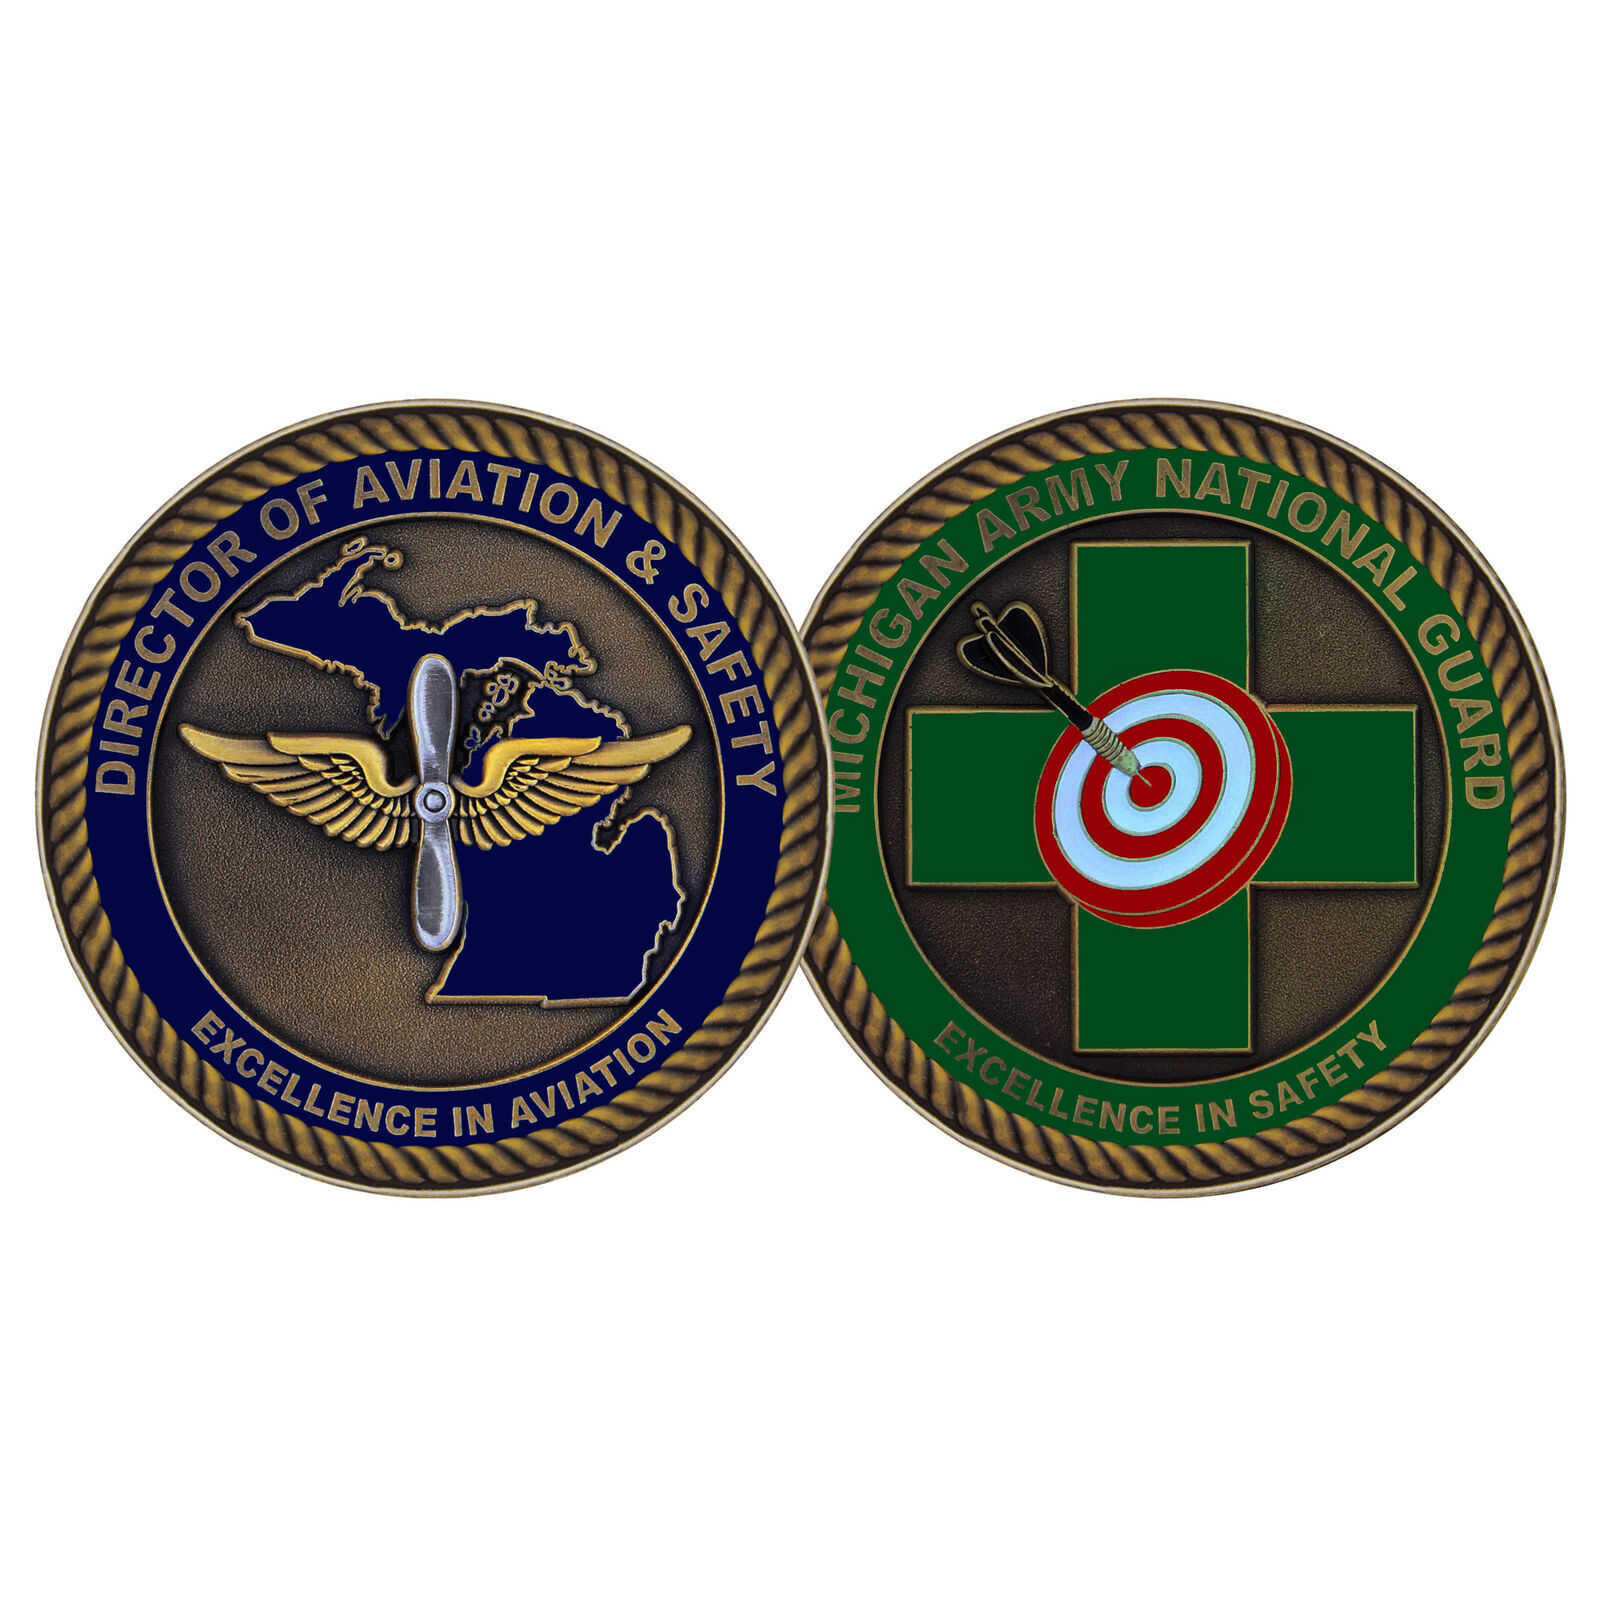 DIRECTORATE OF AVIATION SAFETY COIN